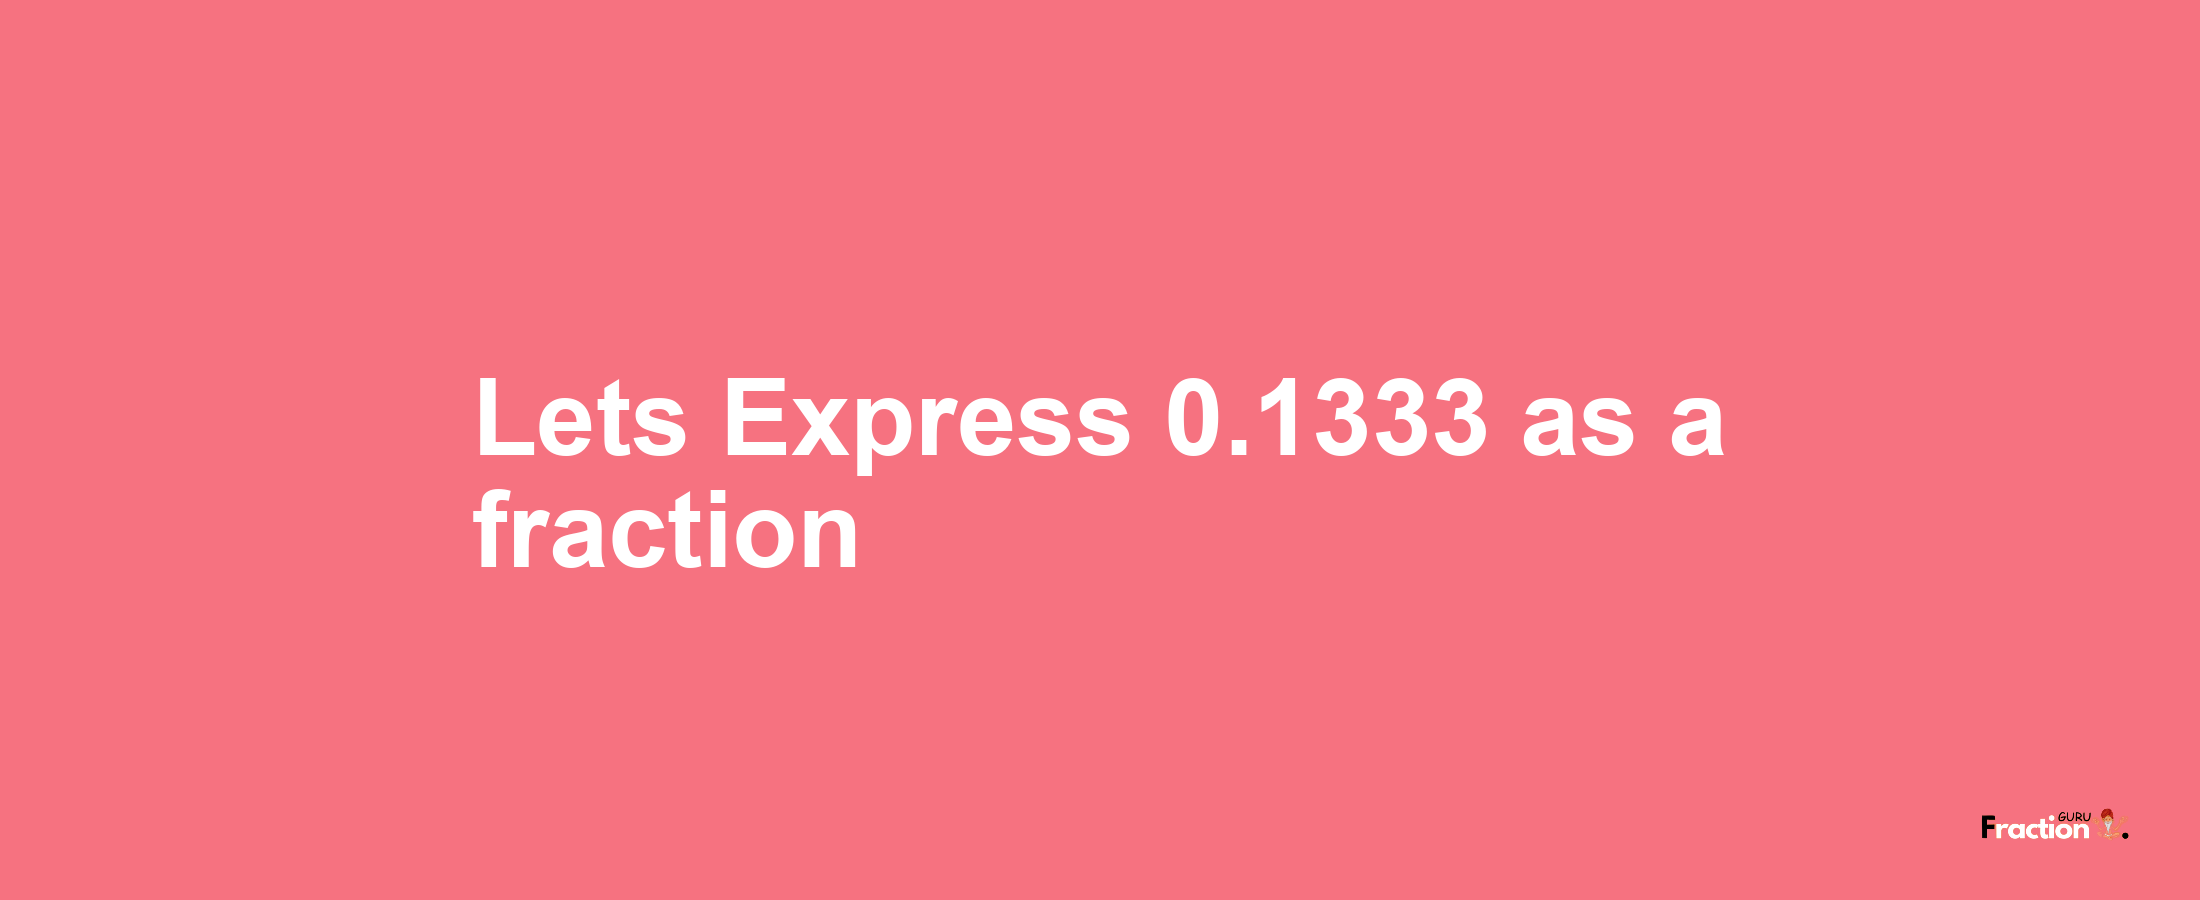 Lets Express 0.1333 as afraction